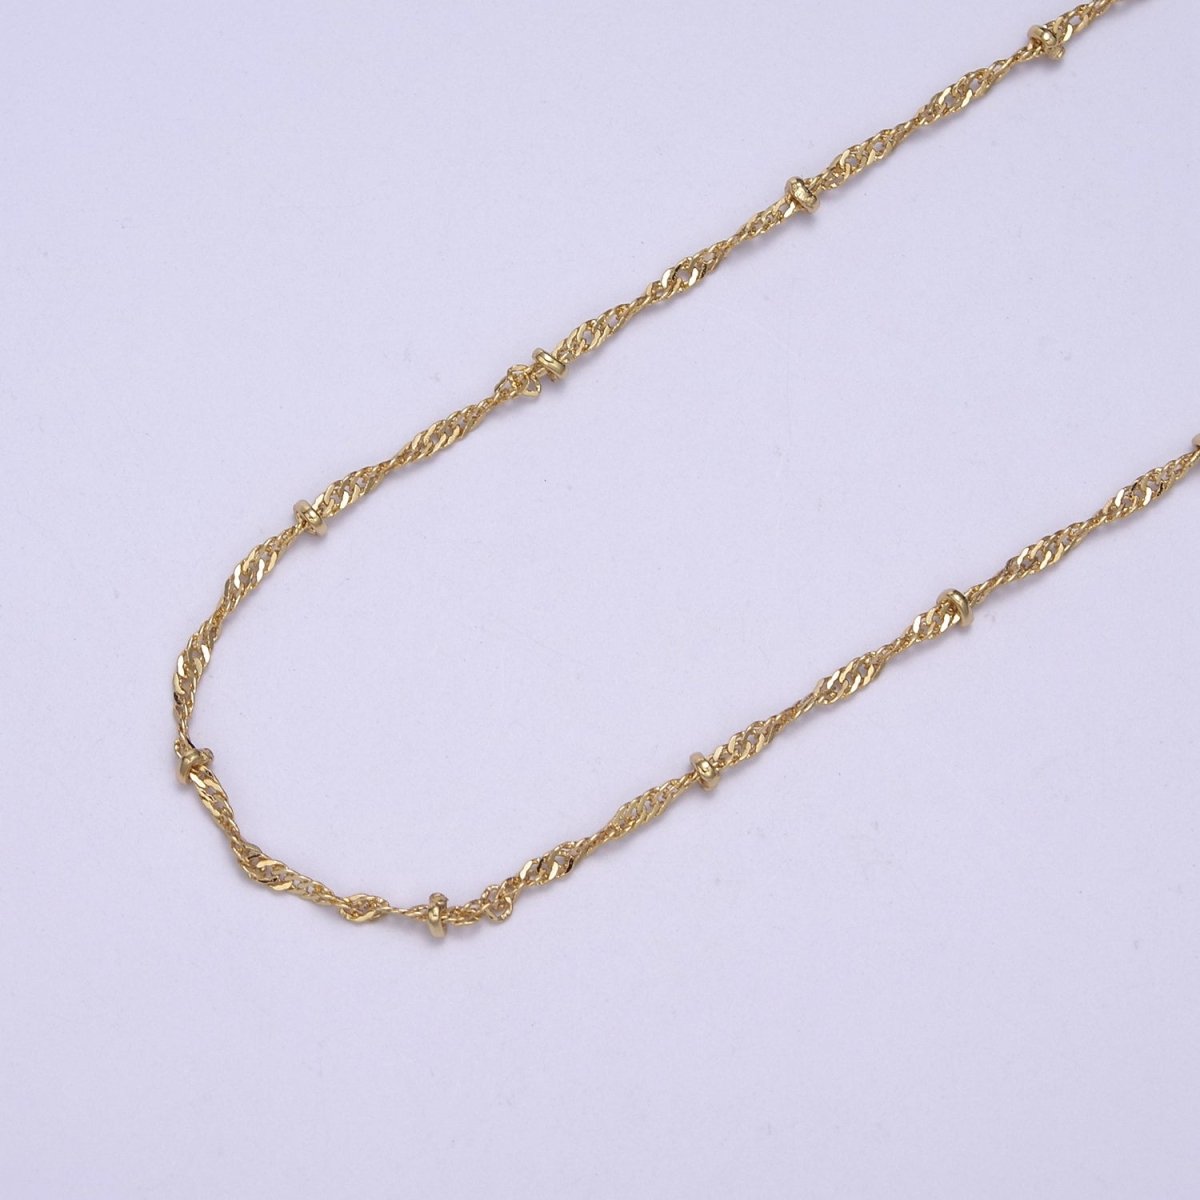 24K Gold Filled Singapore Satellite Bead Chain, 2.3mm Unfinished Chain by Yard For Jewelry Making Supply Component | ROLL-639, ROLL-640 Clearance Pricing - DLUXCA